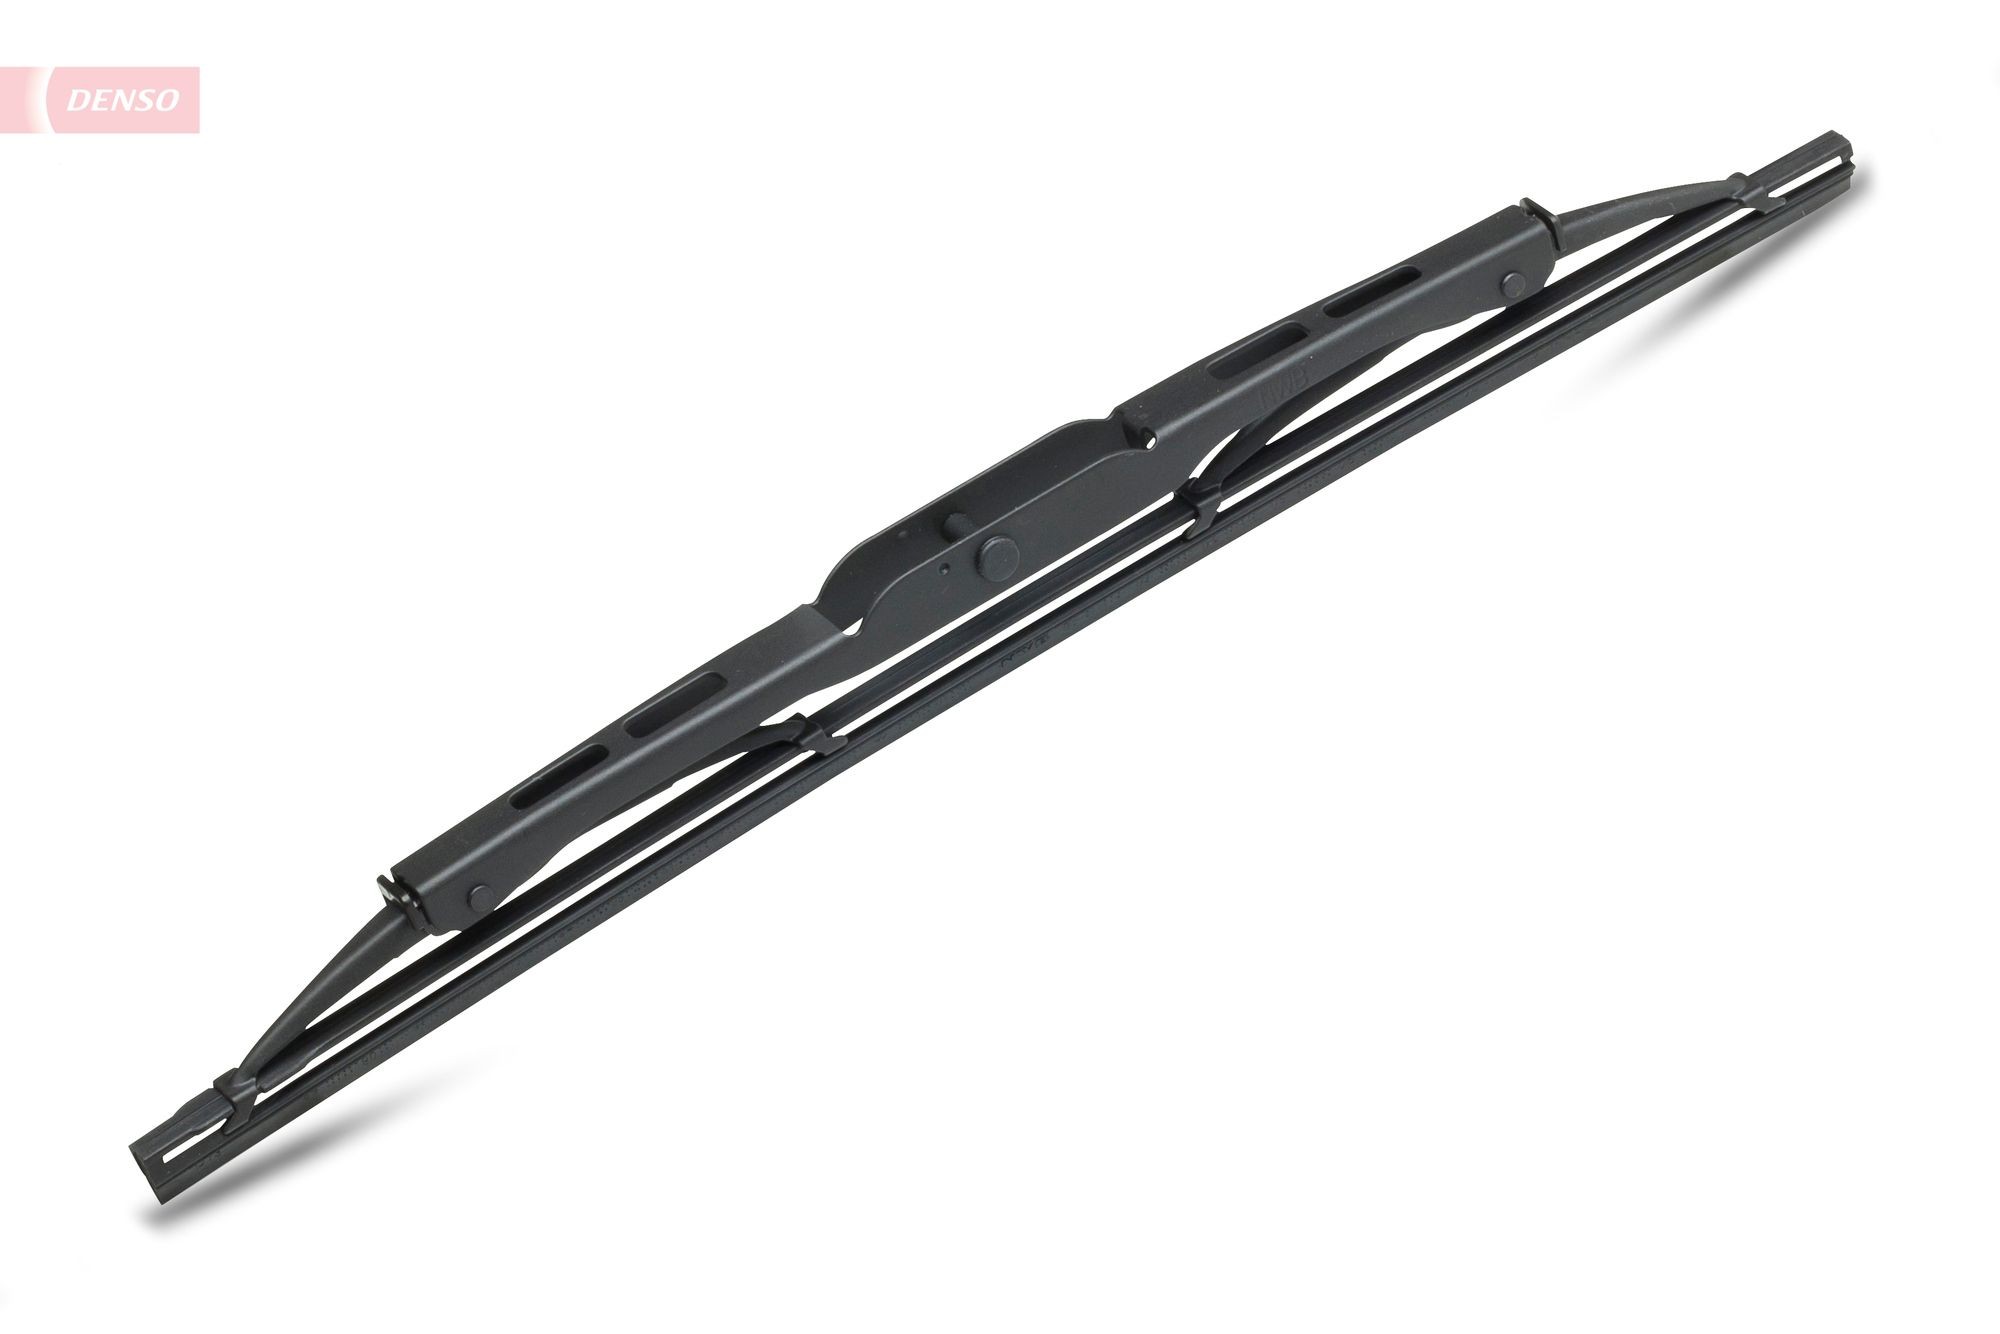 DENSO Wiper blade rear and front Chevrolet Captiva C100 new DM-030